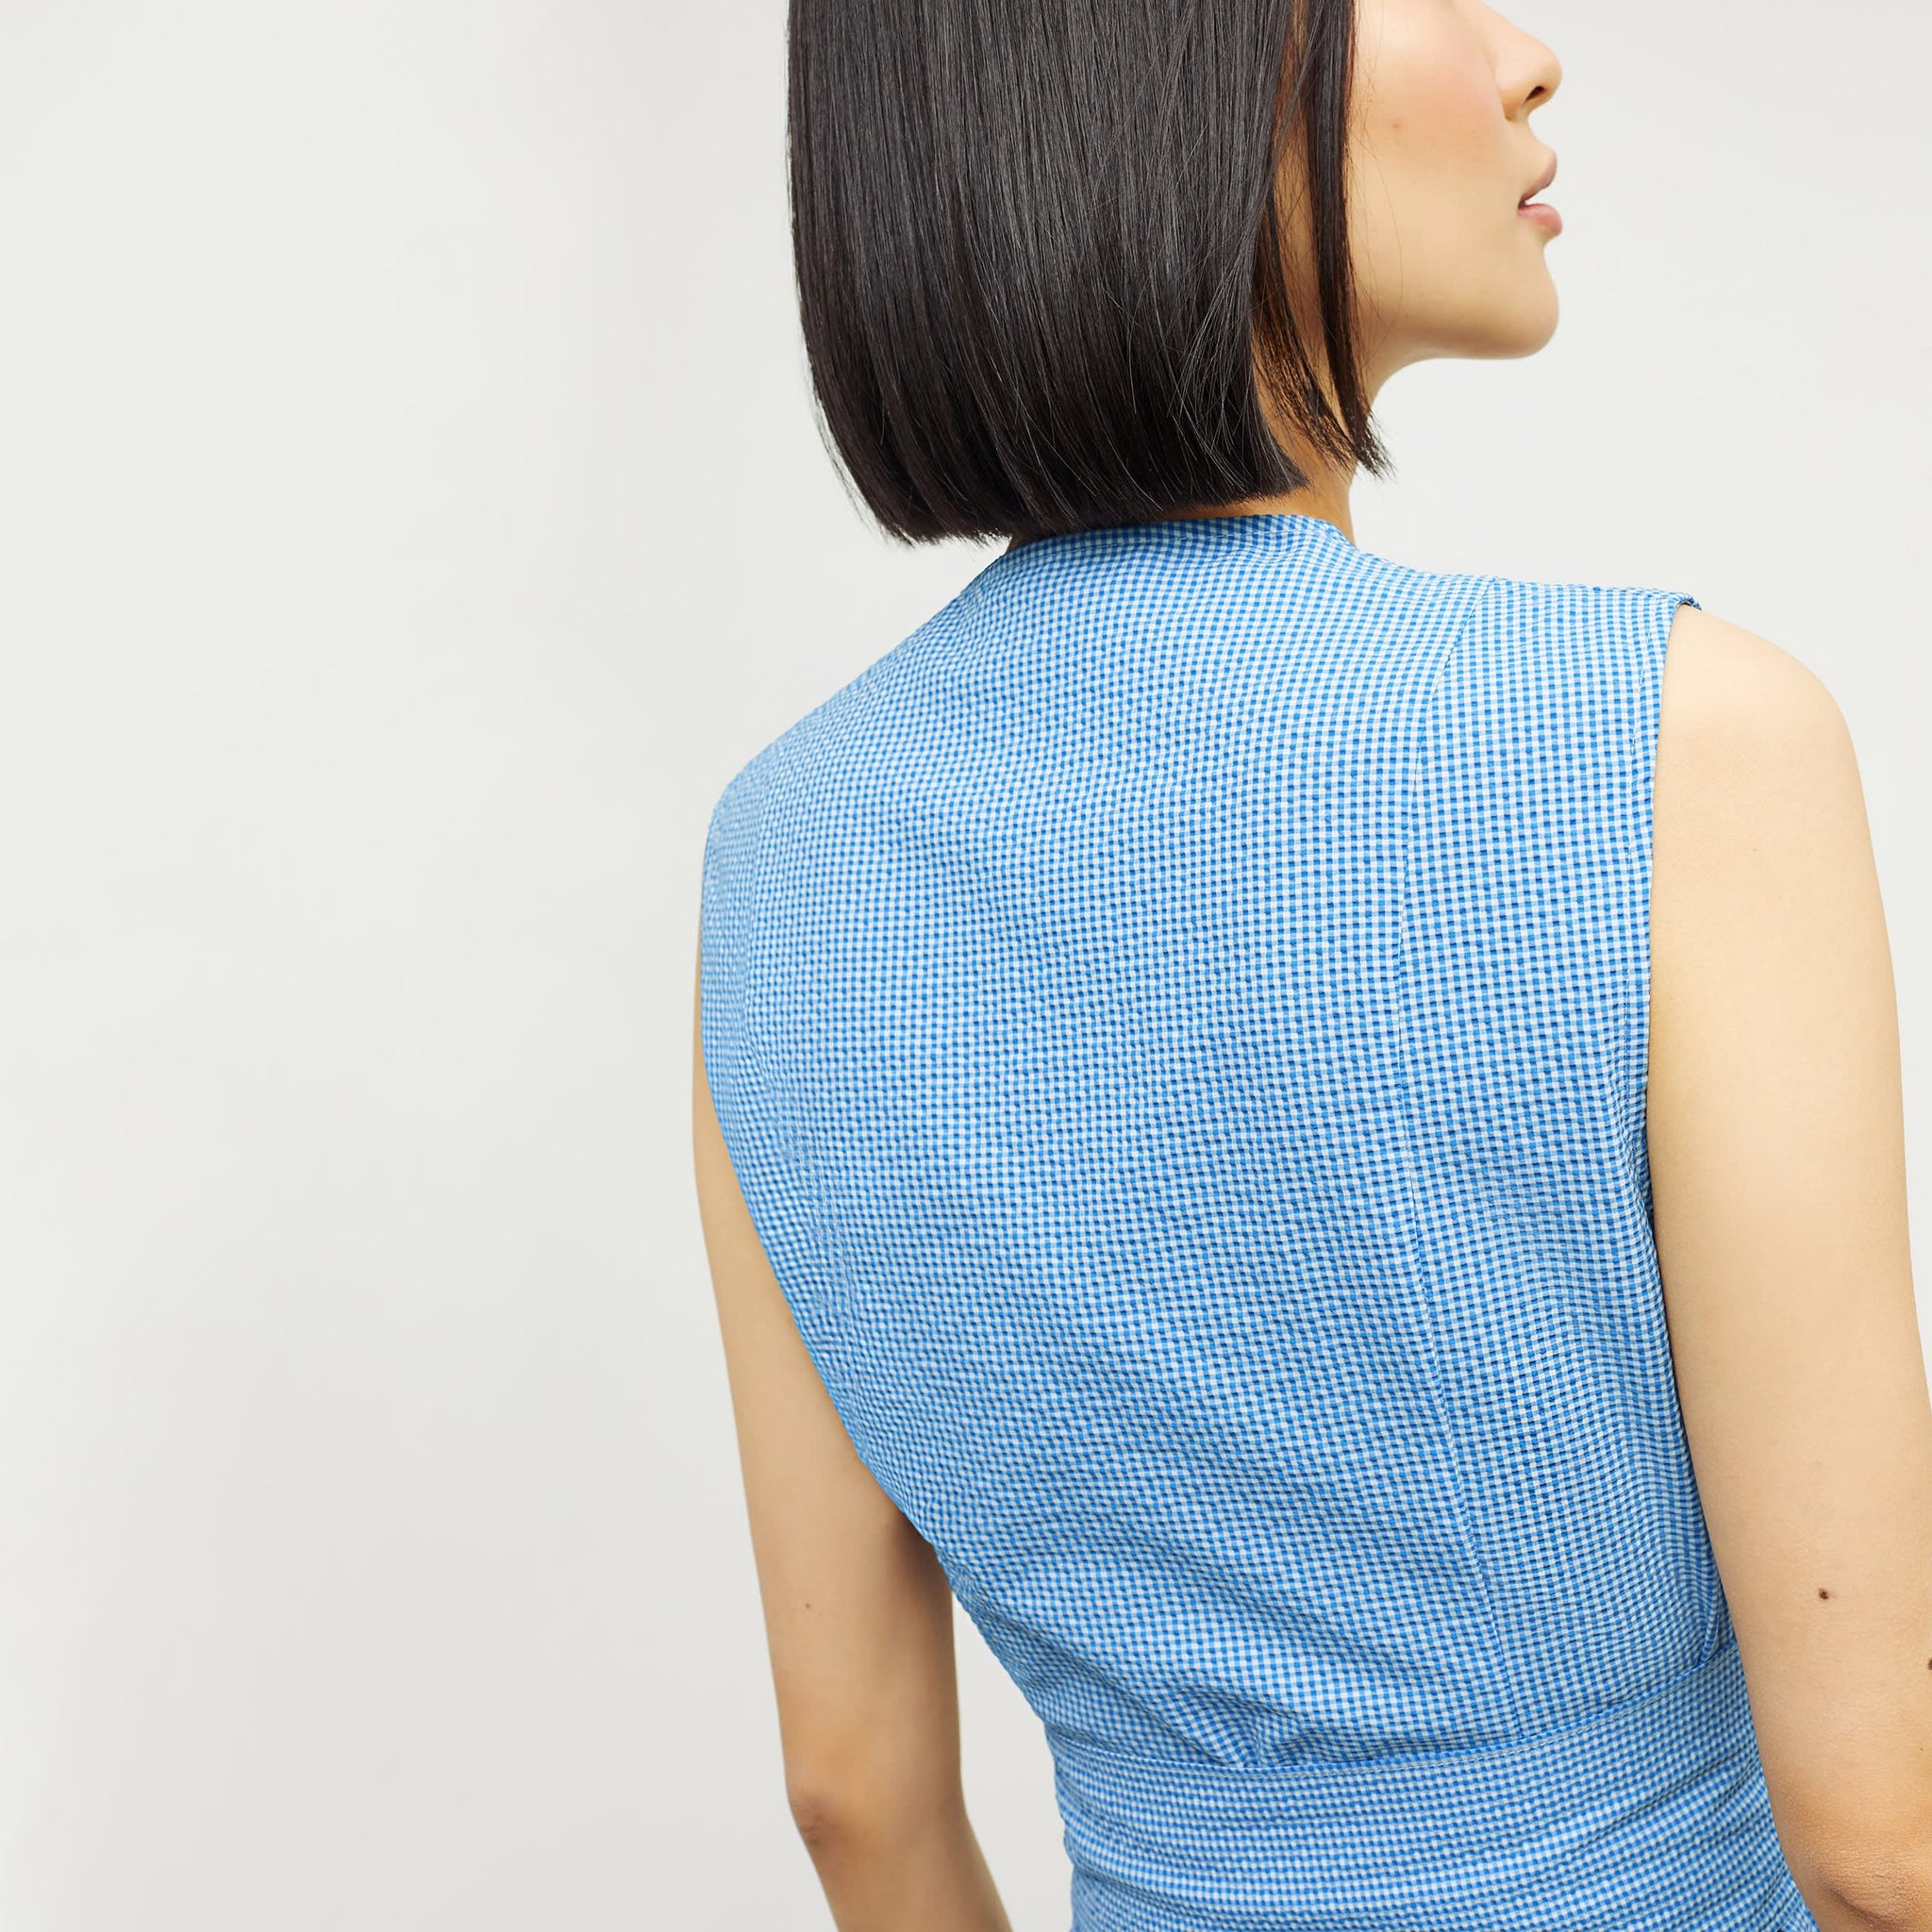 Back image of a woman standing wearing the ellen top in gingham seersucker in capri blue and white